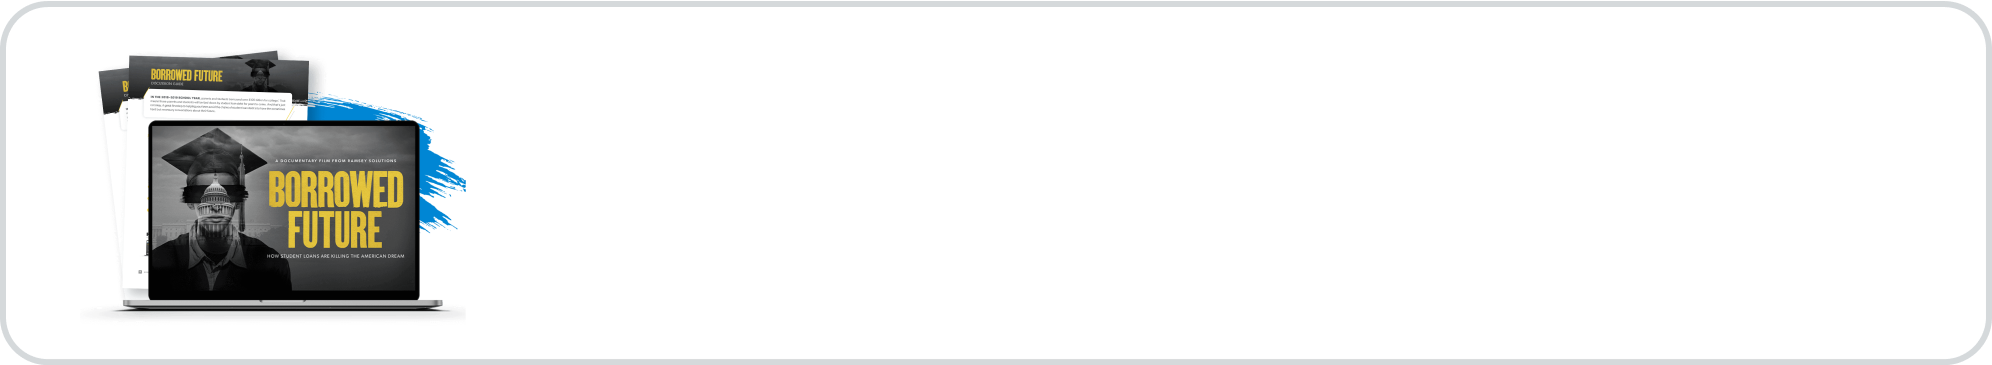 Bonus Course! The hit documentary about the dark side of the student loan industry, included in every membership.